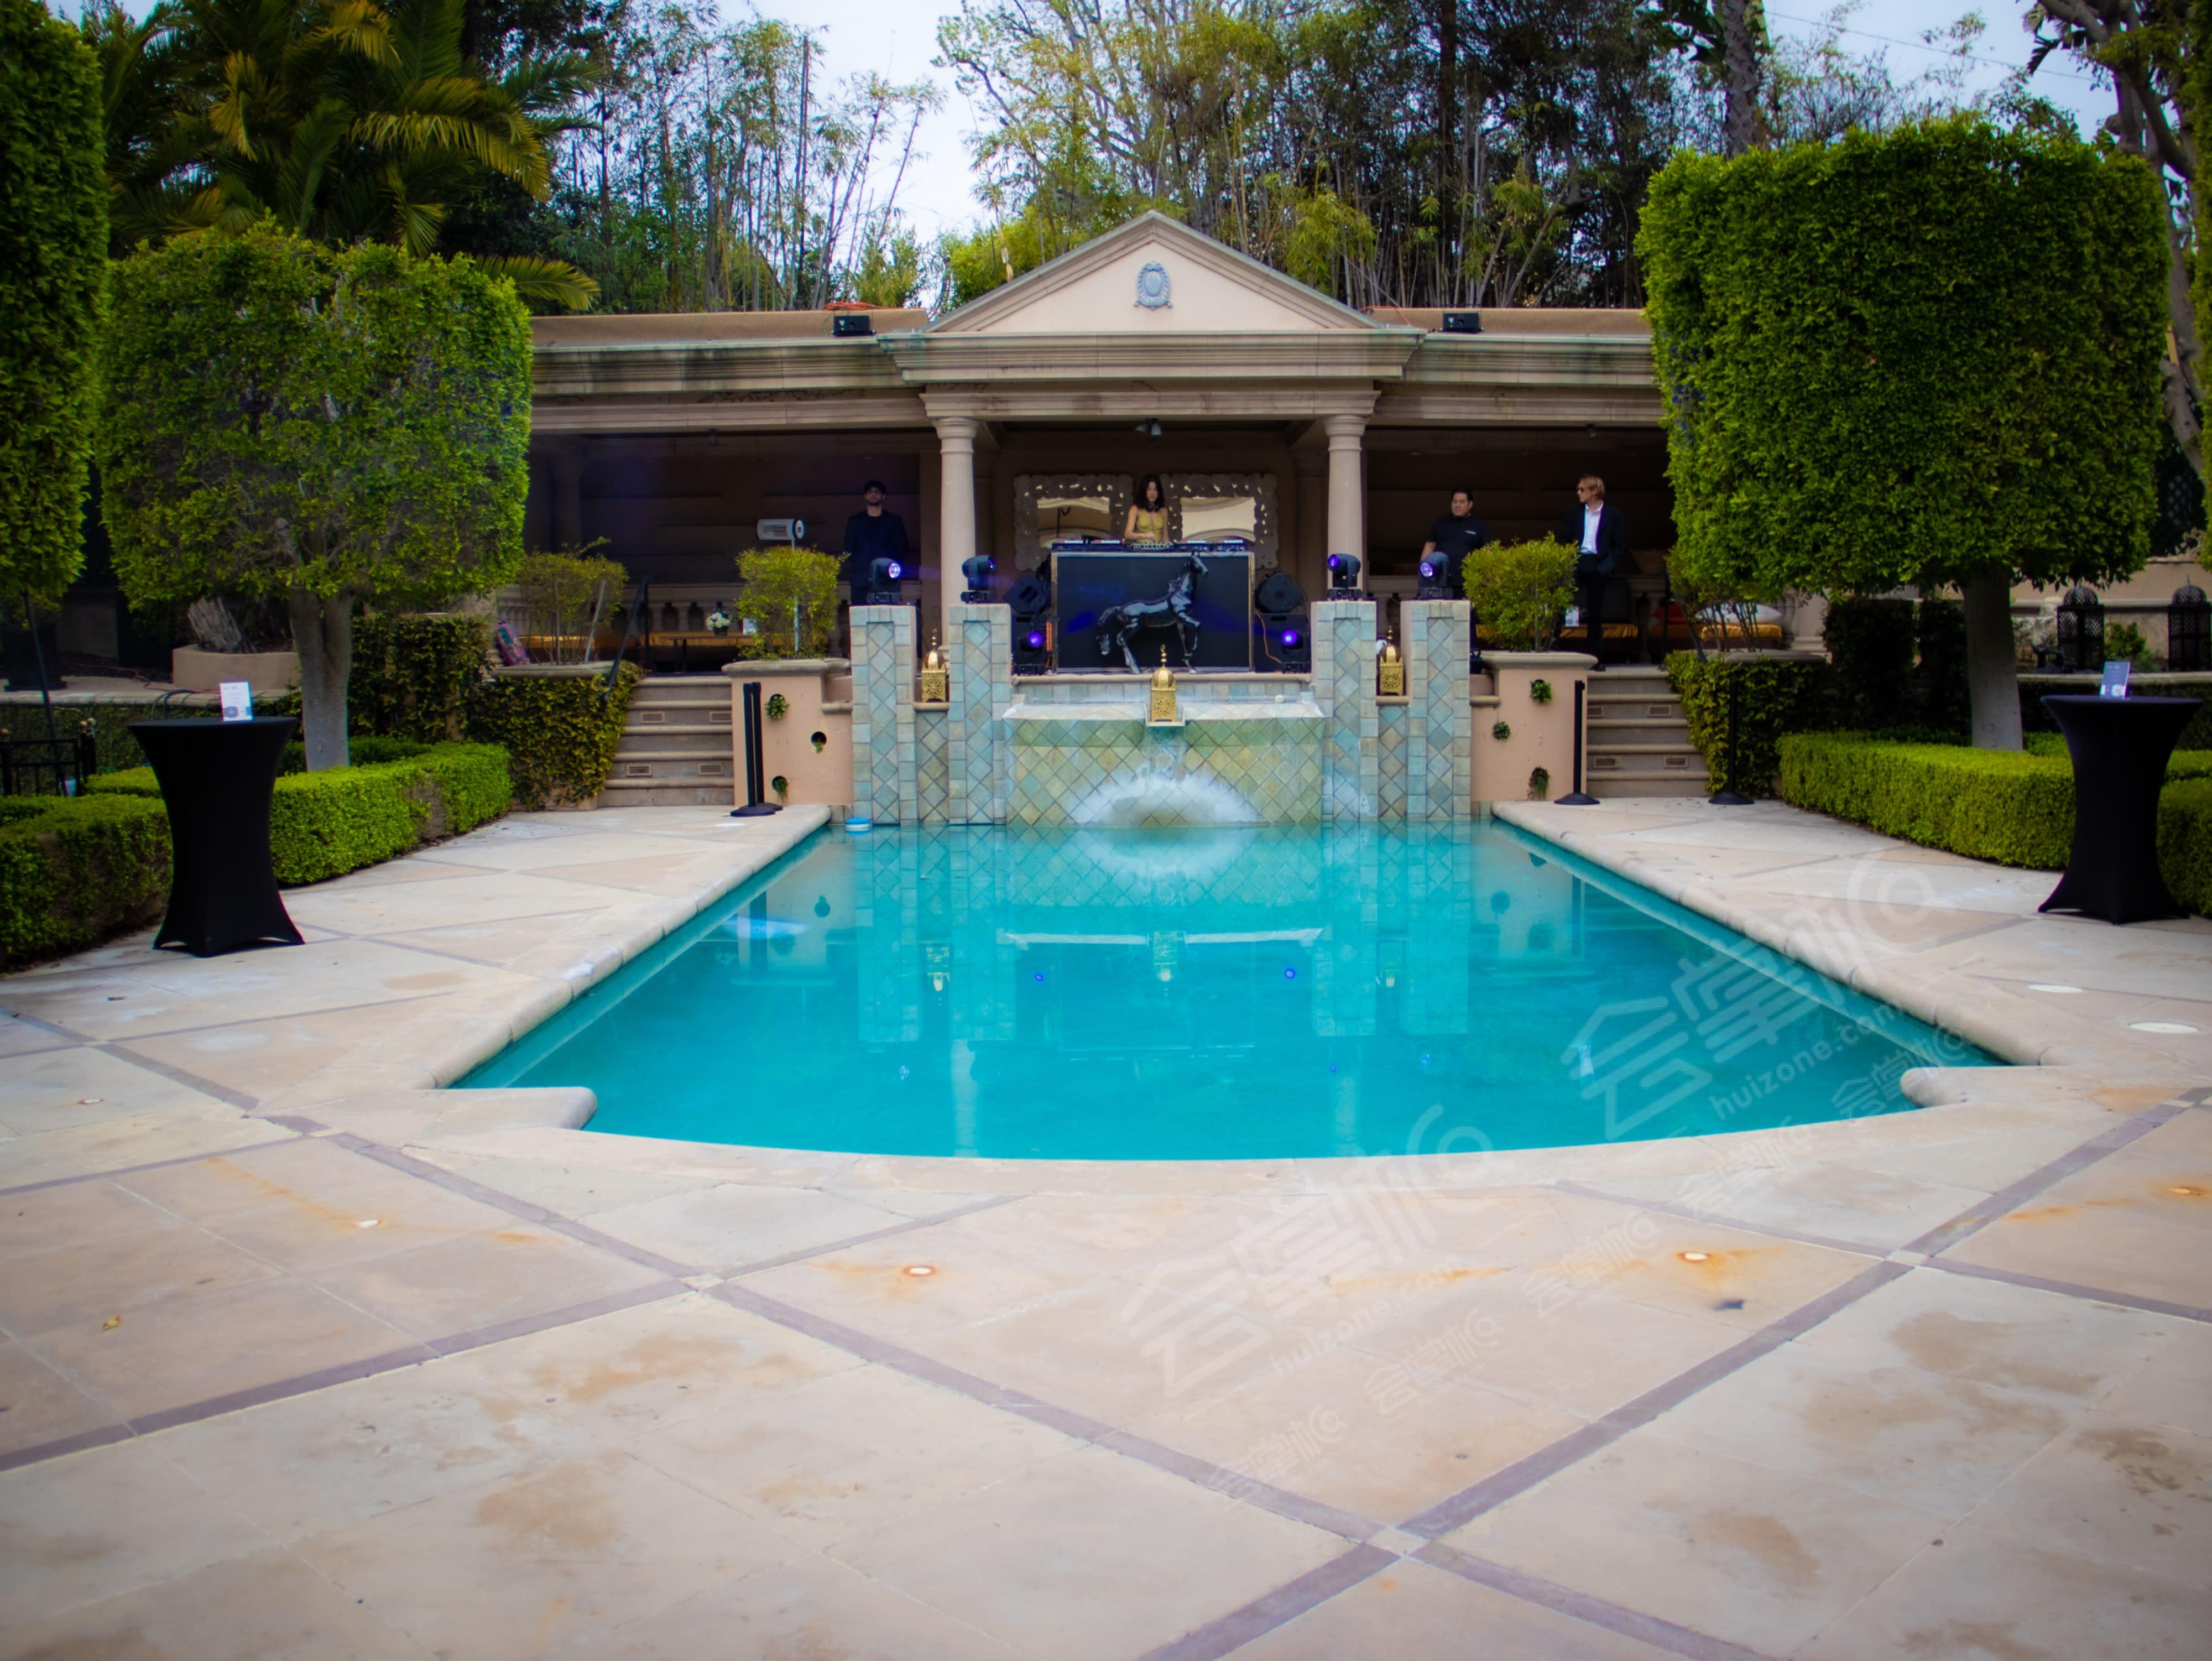 Sophisticated Le Miraval Villa w/ Pool/Garden Oasis for Luxe Events (700 guests max)